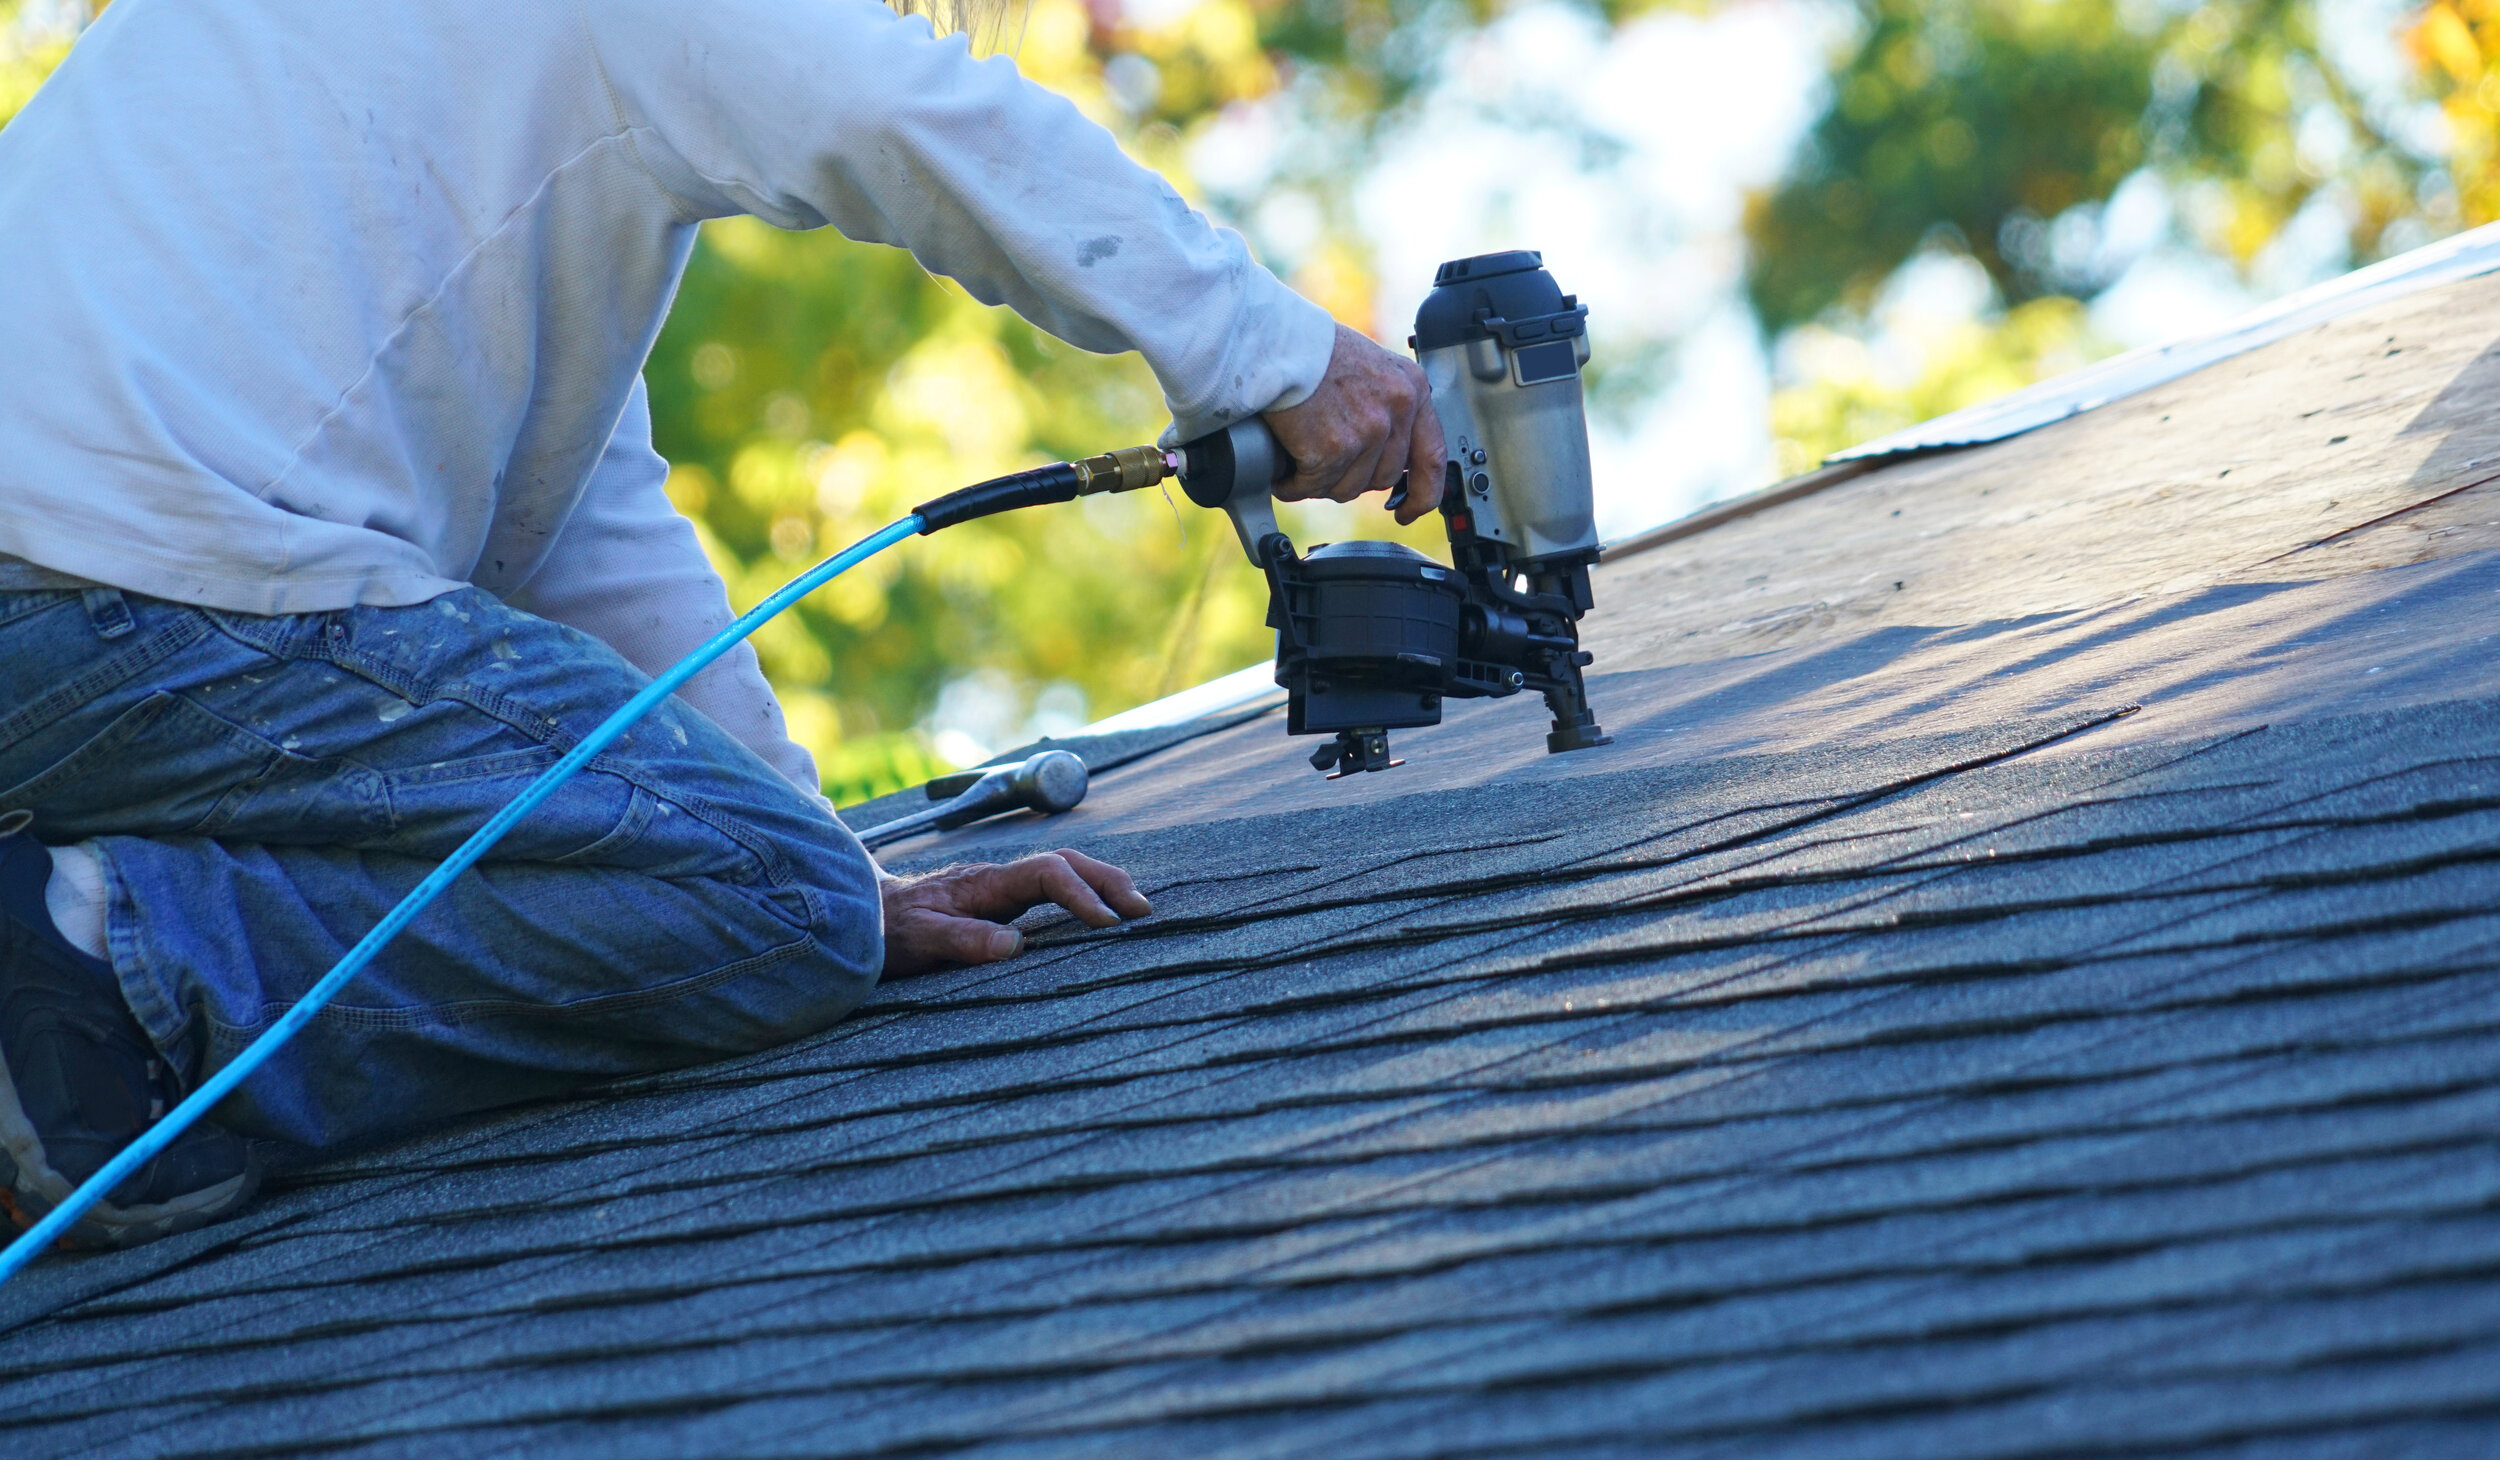 Roofing Contractor | Stanhope, NJ | Flanders, NJ | Hackettstown, NJ How Long Does Roof Tar Take To Dry